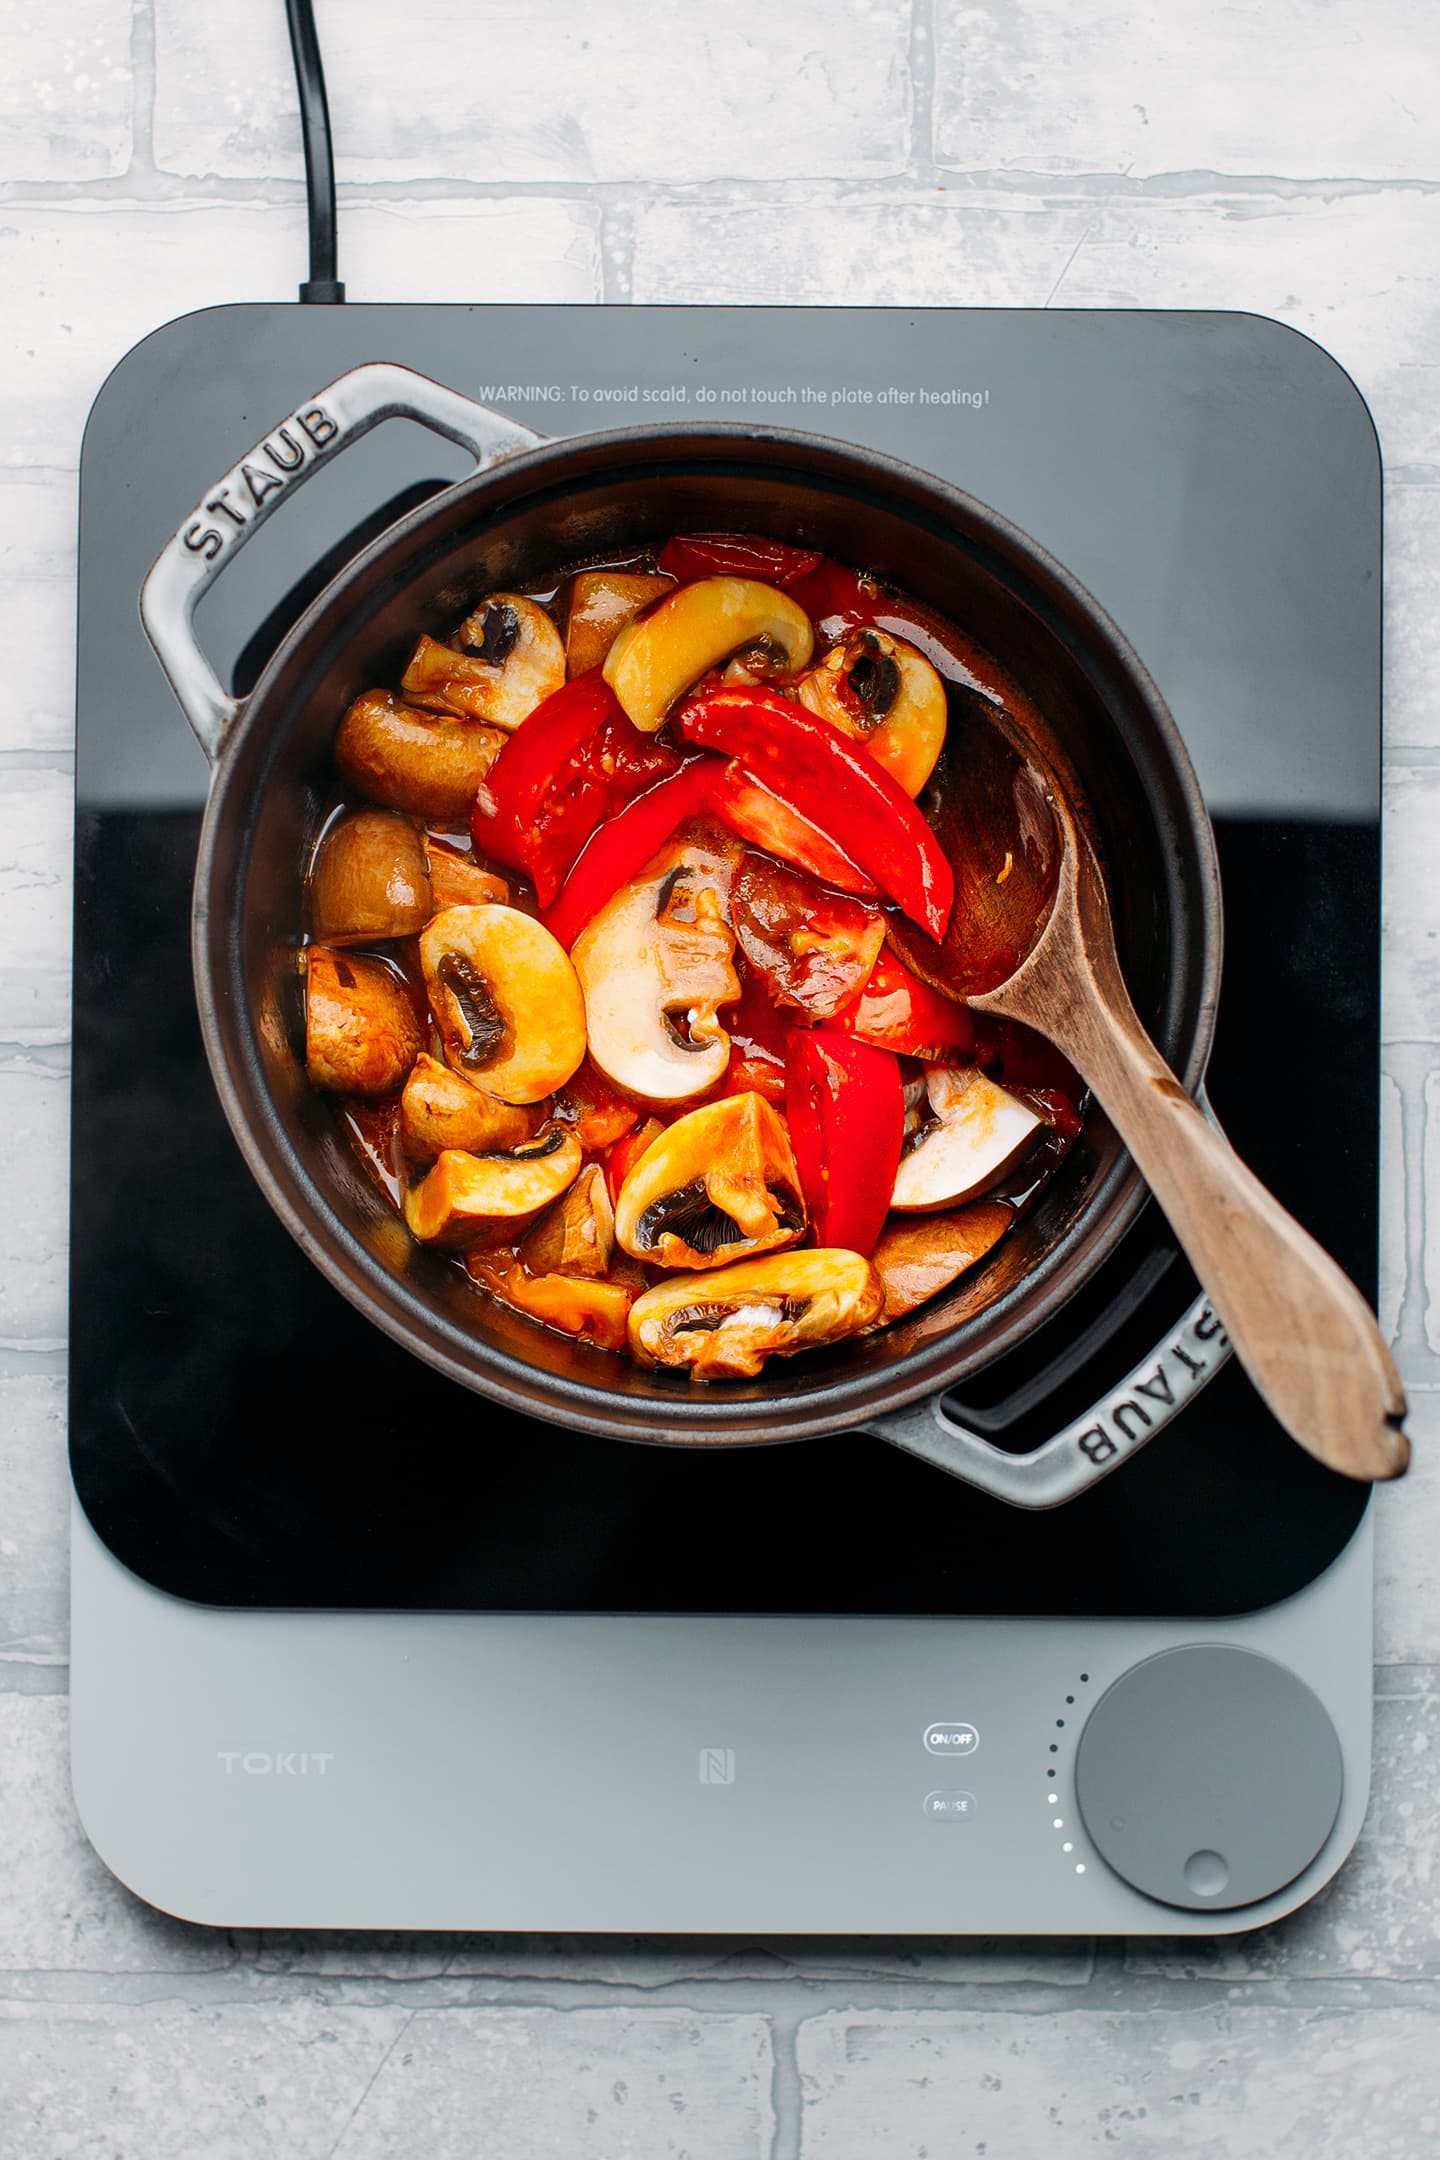 Sautéed mushrooms and tomatoes in a pot.